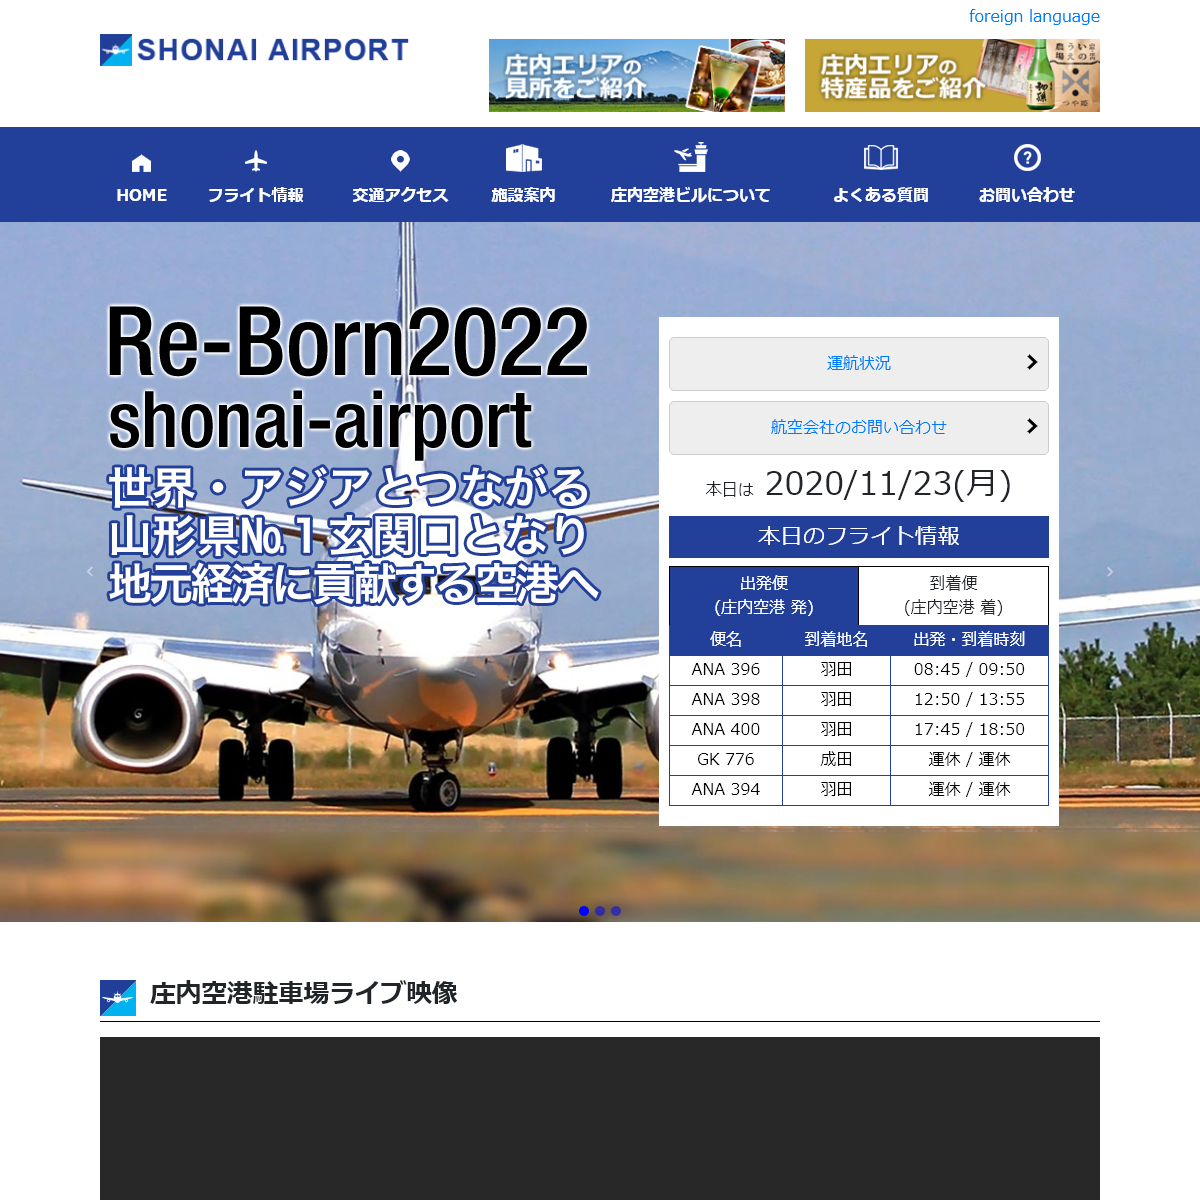 A complete backup of shonai-airport.co.jp